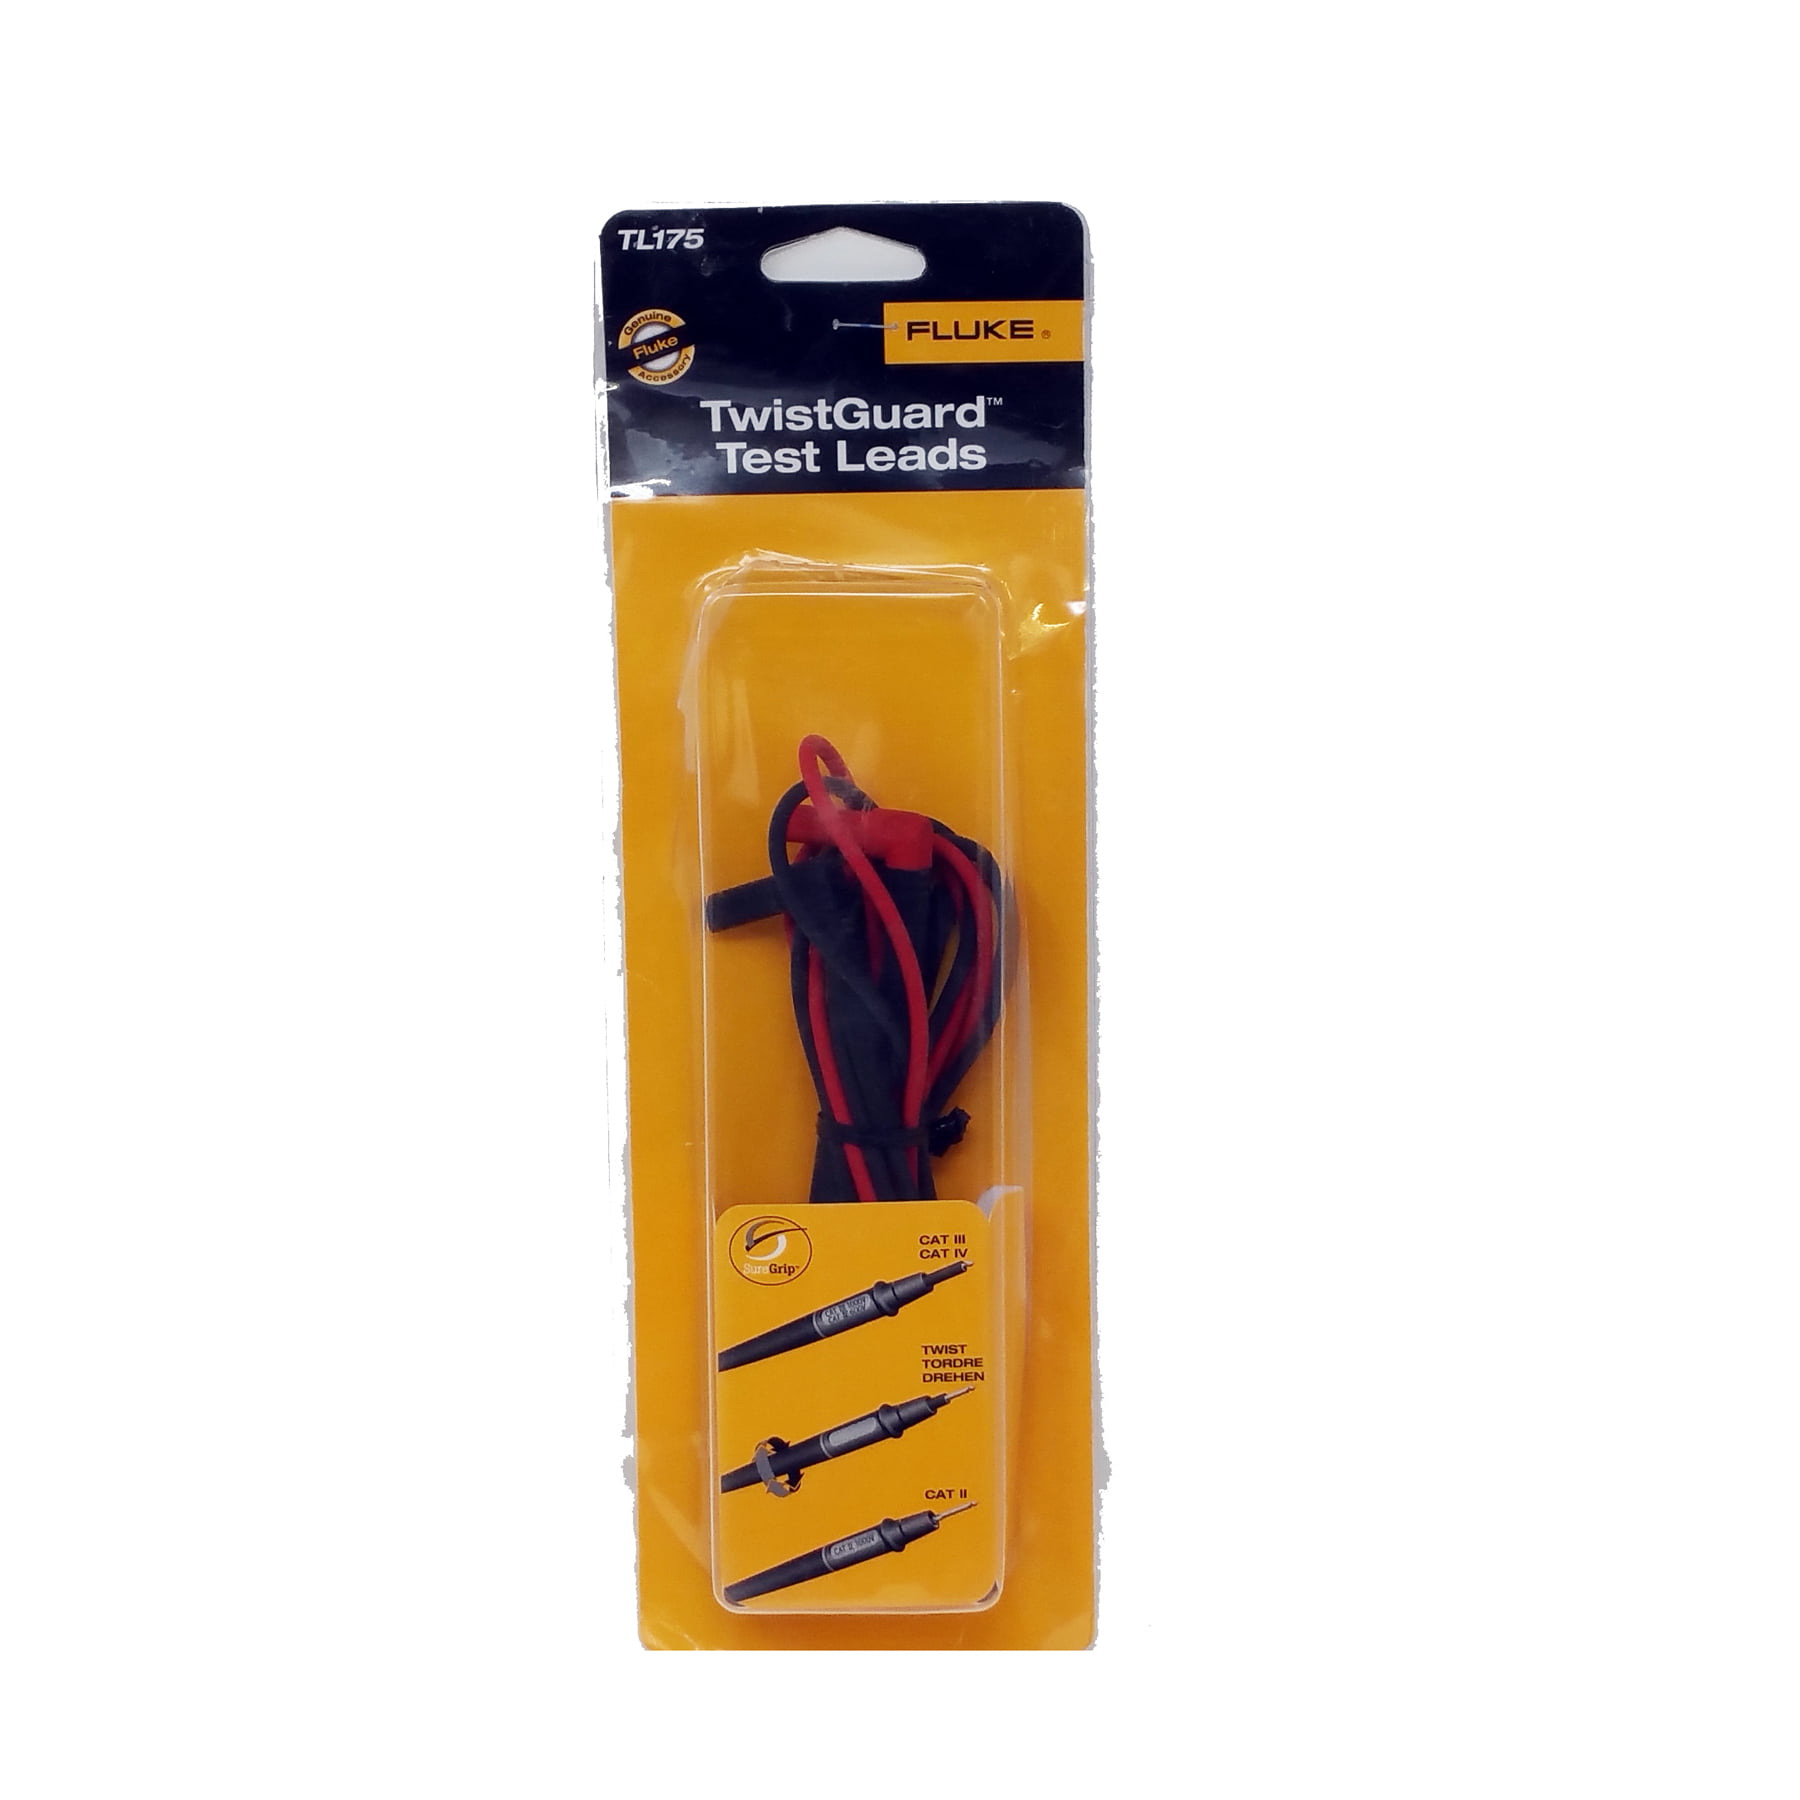 NEW FLUKE TL175 TWISTGUARD TEST LEAD SET WITH NEXT DAY 1ST CLASS DELIVERY 